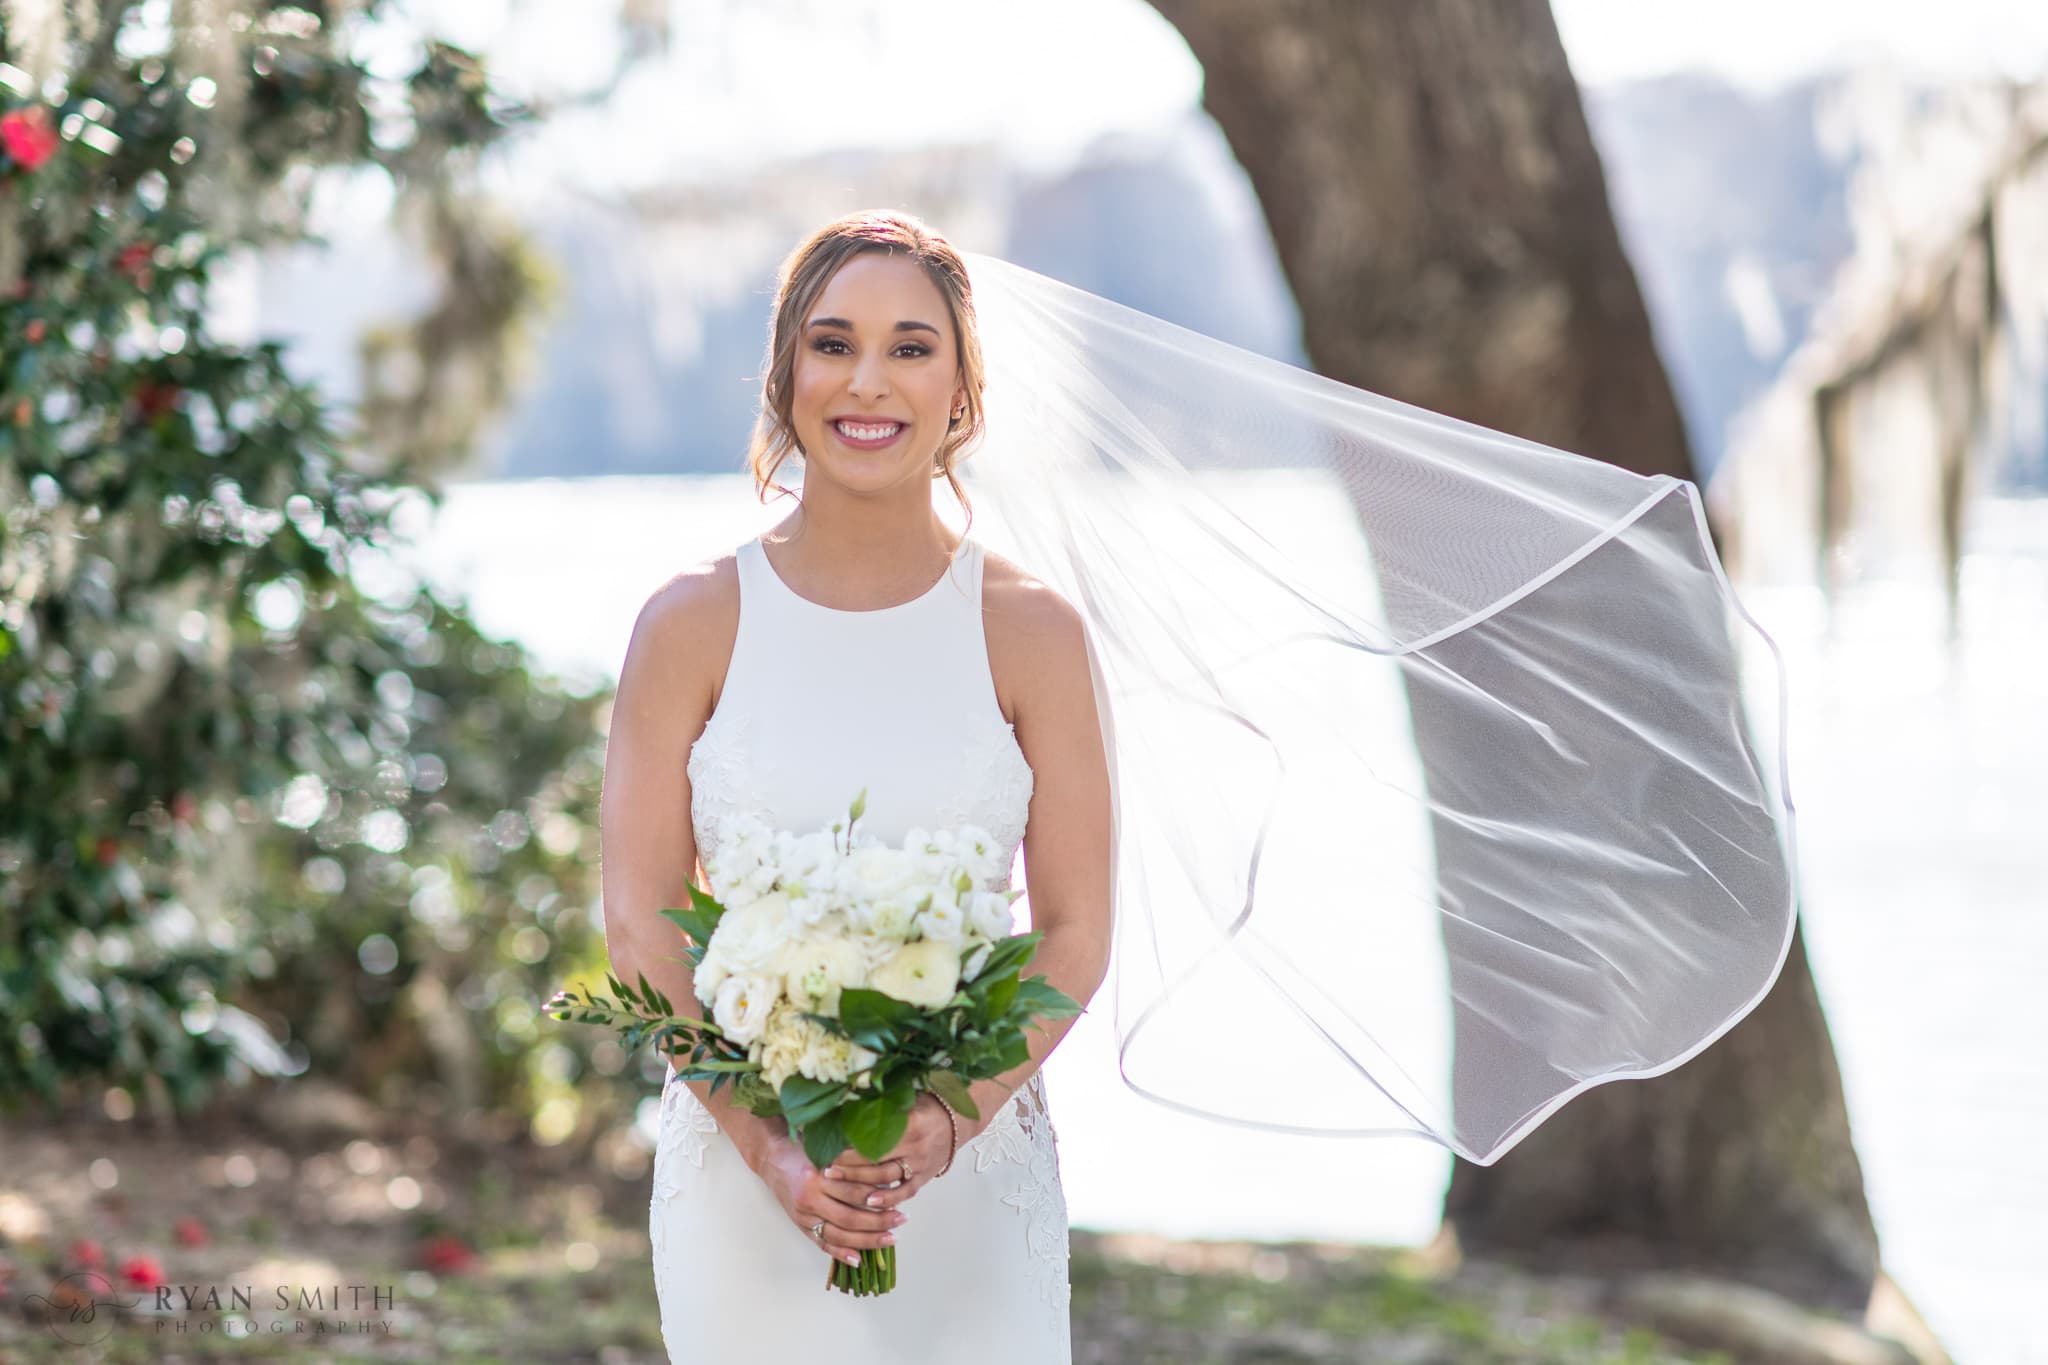 Bride's veil blowing in the wind - Kimbels at Wachesaw Plantation